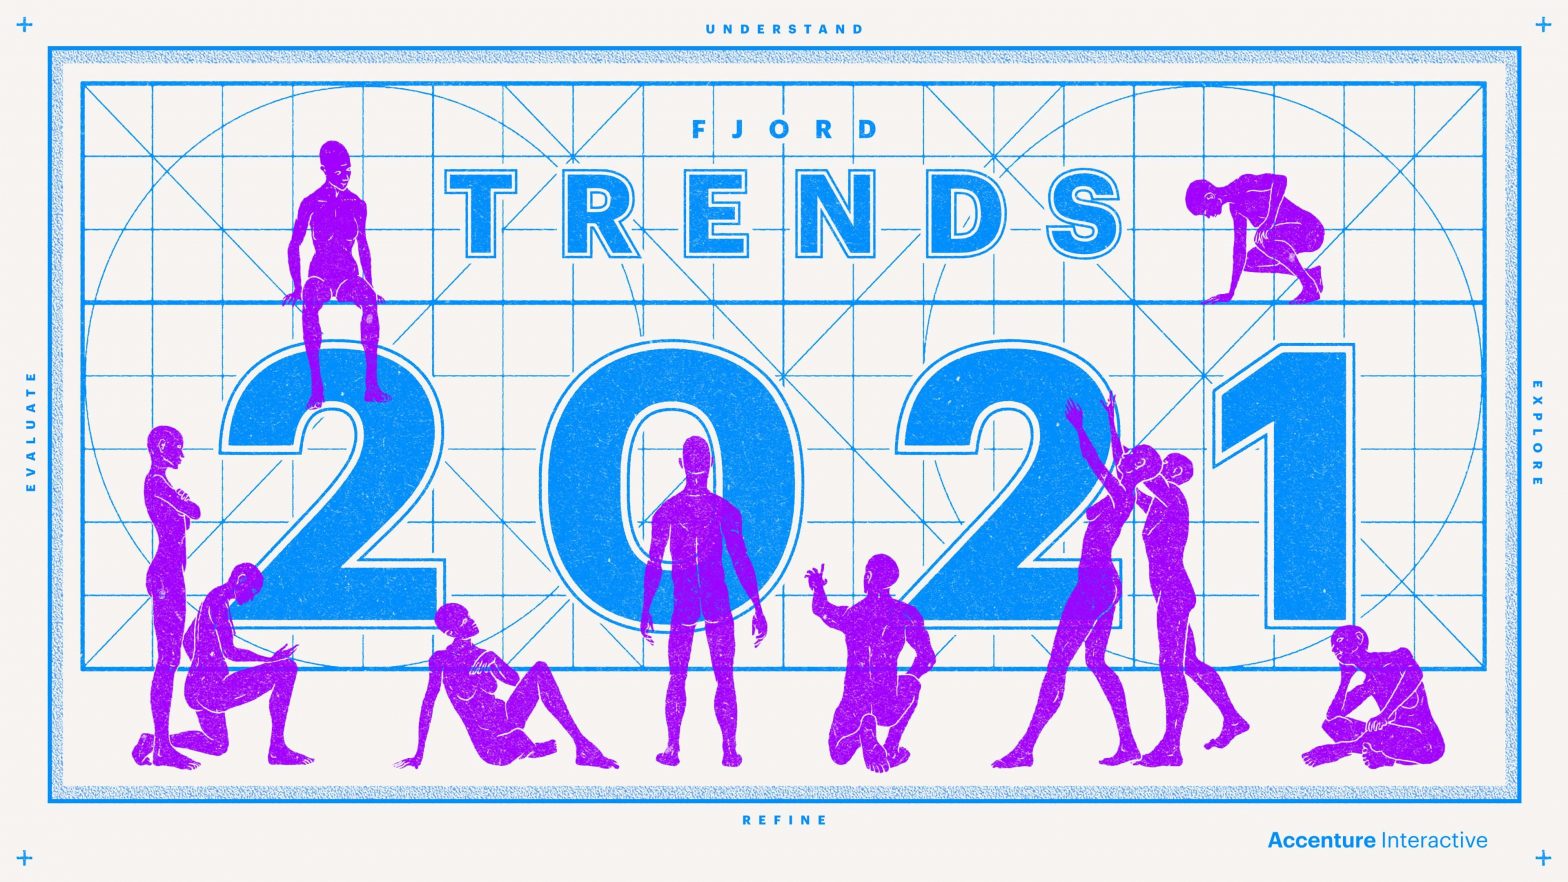 2021 will redefine 21st century: “Fjord Trends 2021” report from Accenture Interactive